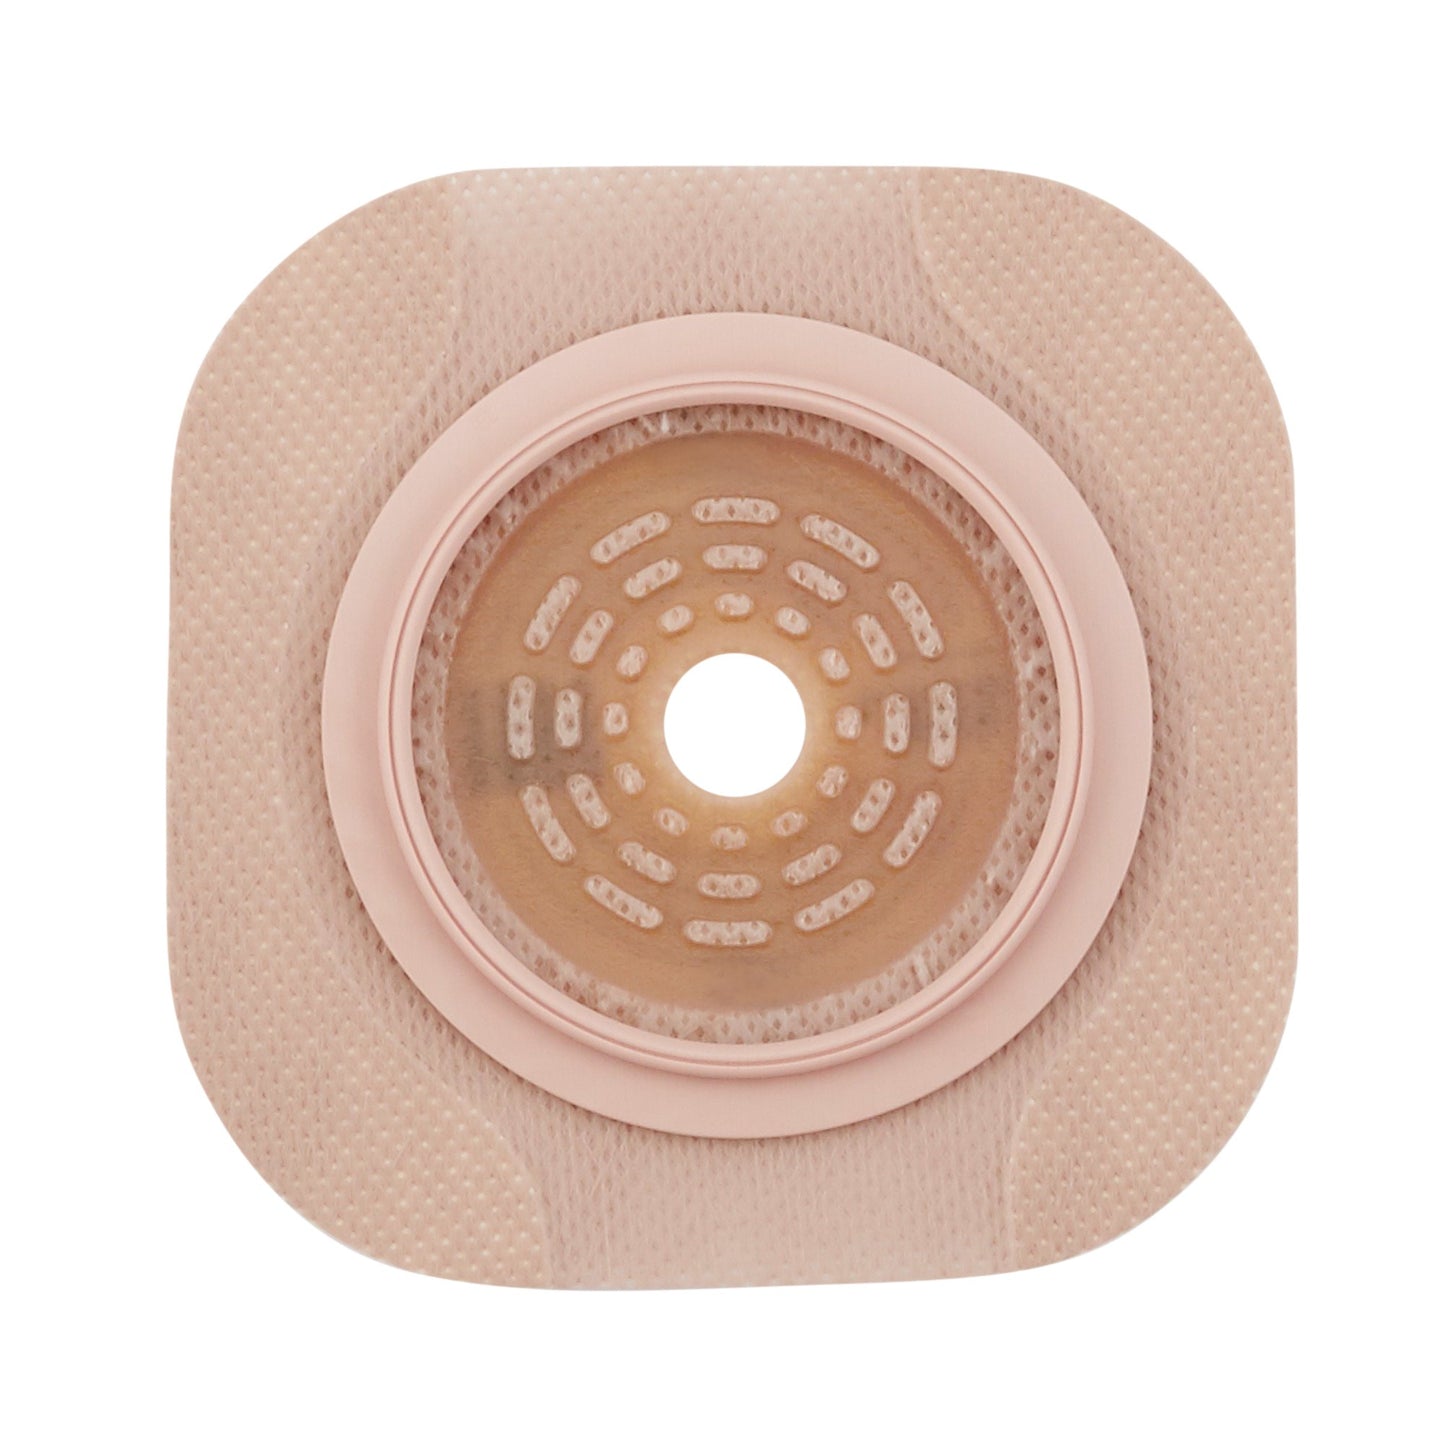 New Image™ Flextend™ Colostomy Barrier With Up to 1.75 " Stoma Opening